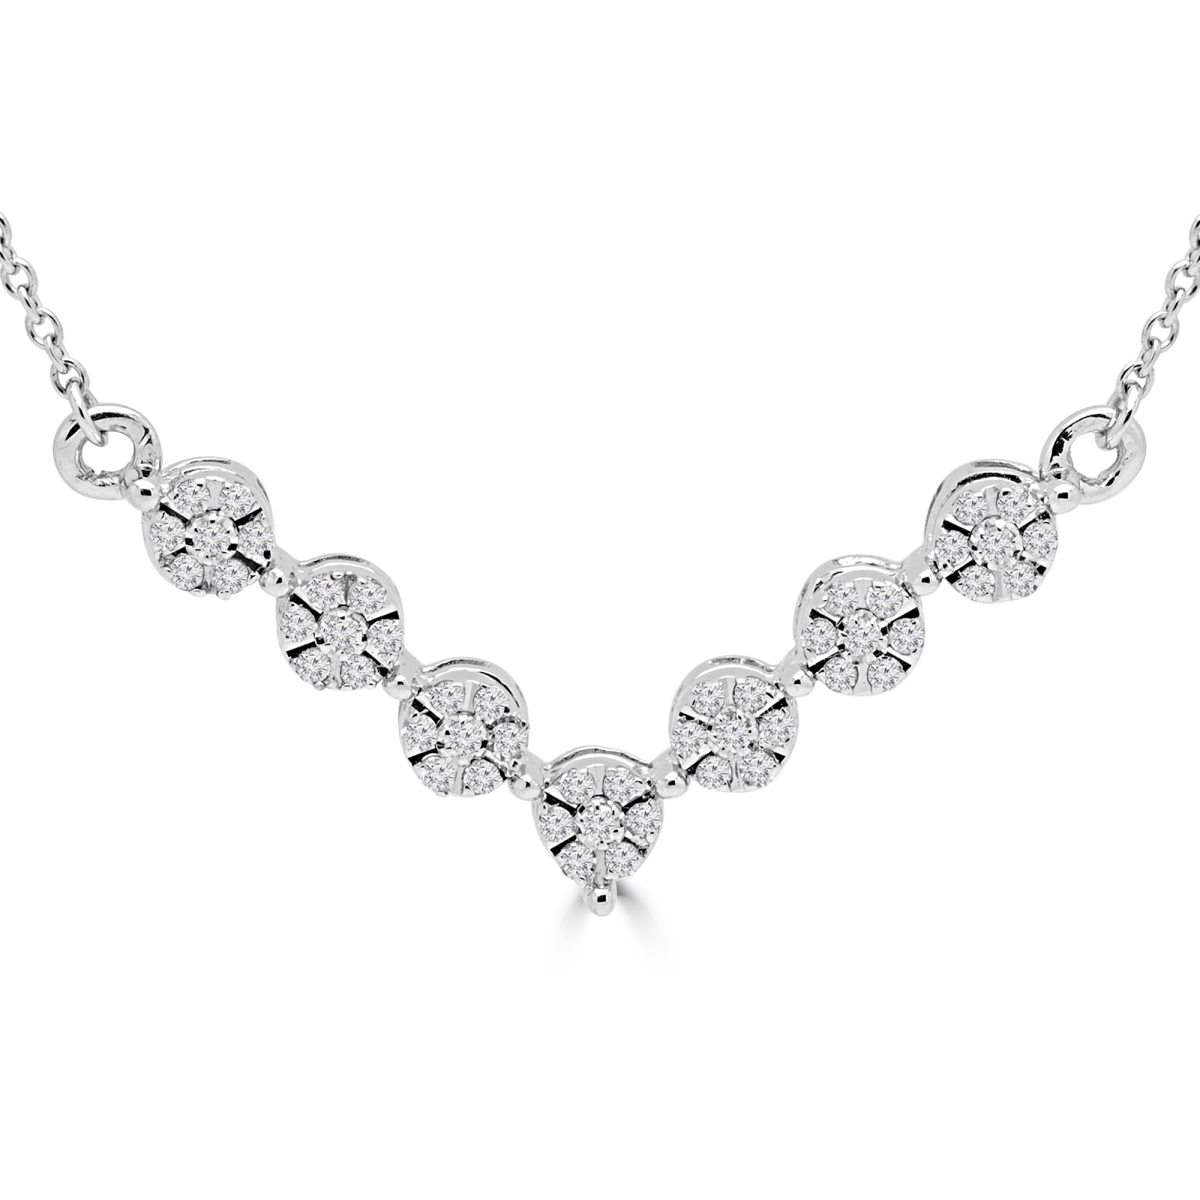 Mdr180024 0.2 Ctw Round Diamond V-shape Cluster Pendant Necklace In 14k White Gold With Chain